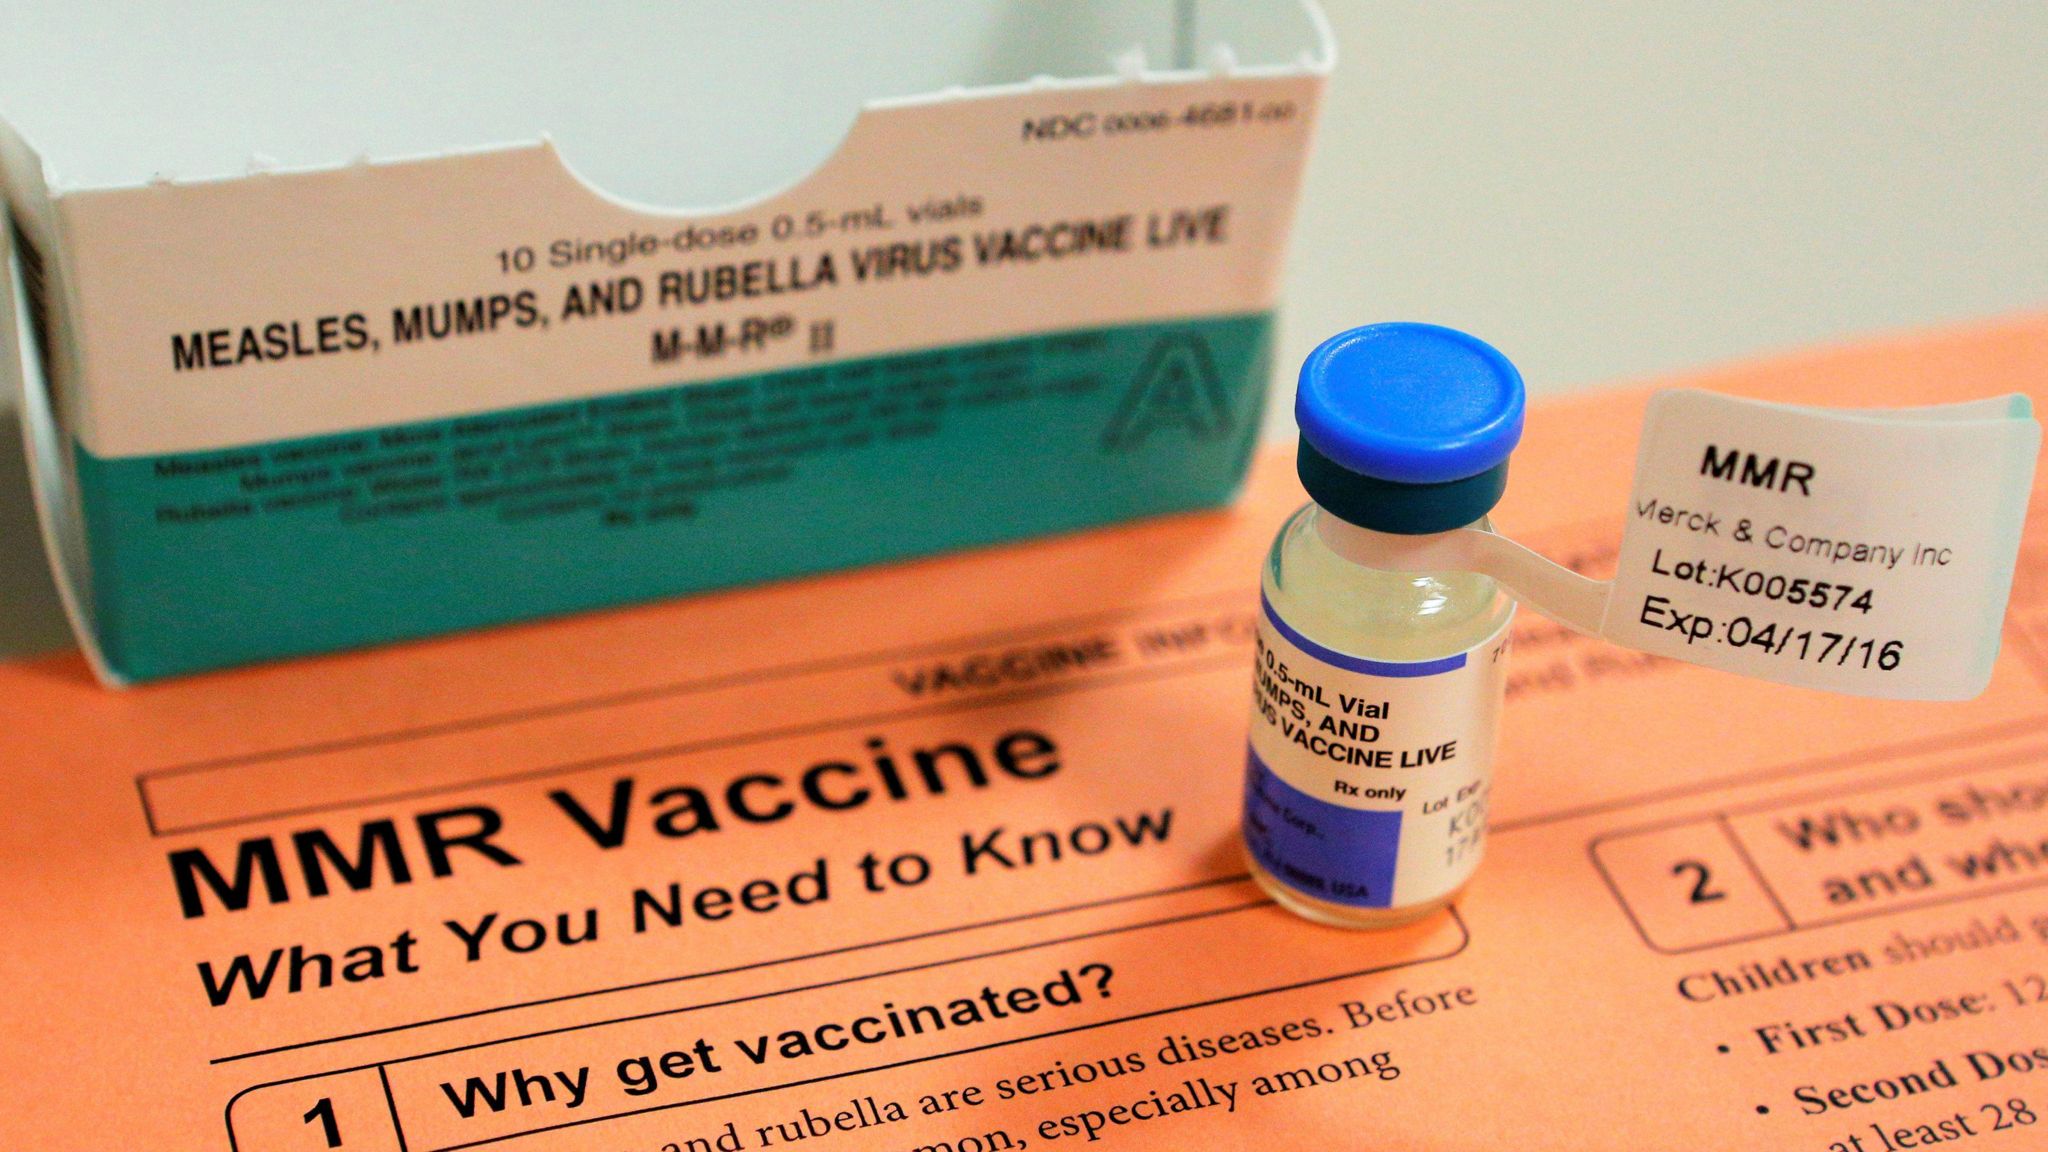 MMR vaccine and information sheet